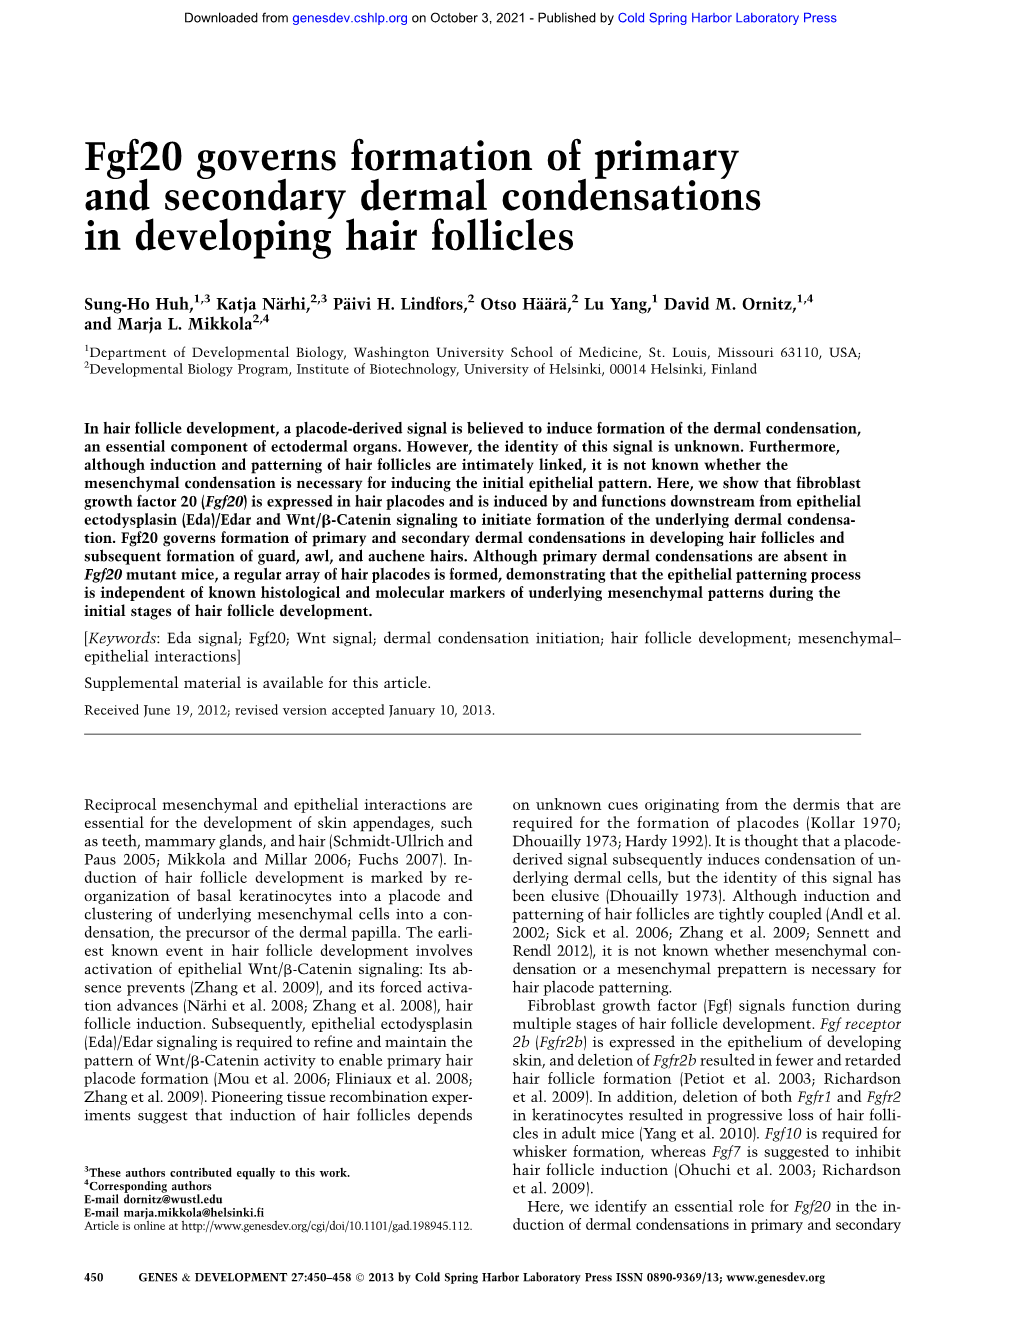 Fgf20 Governs Formation of Primary and Secondary Dermal Condensations in Developing Hair Follicles